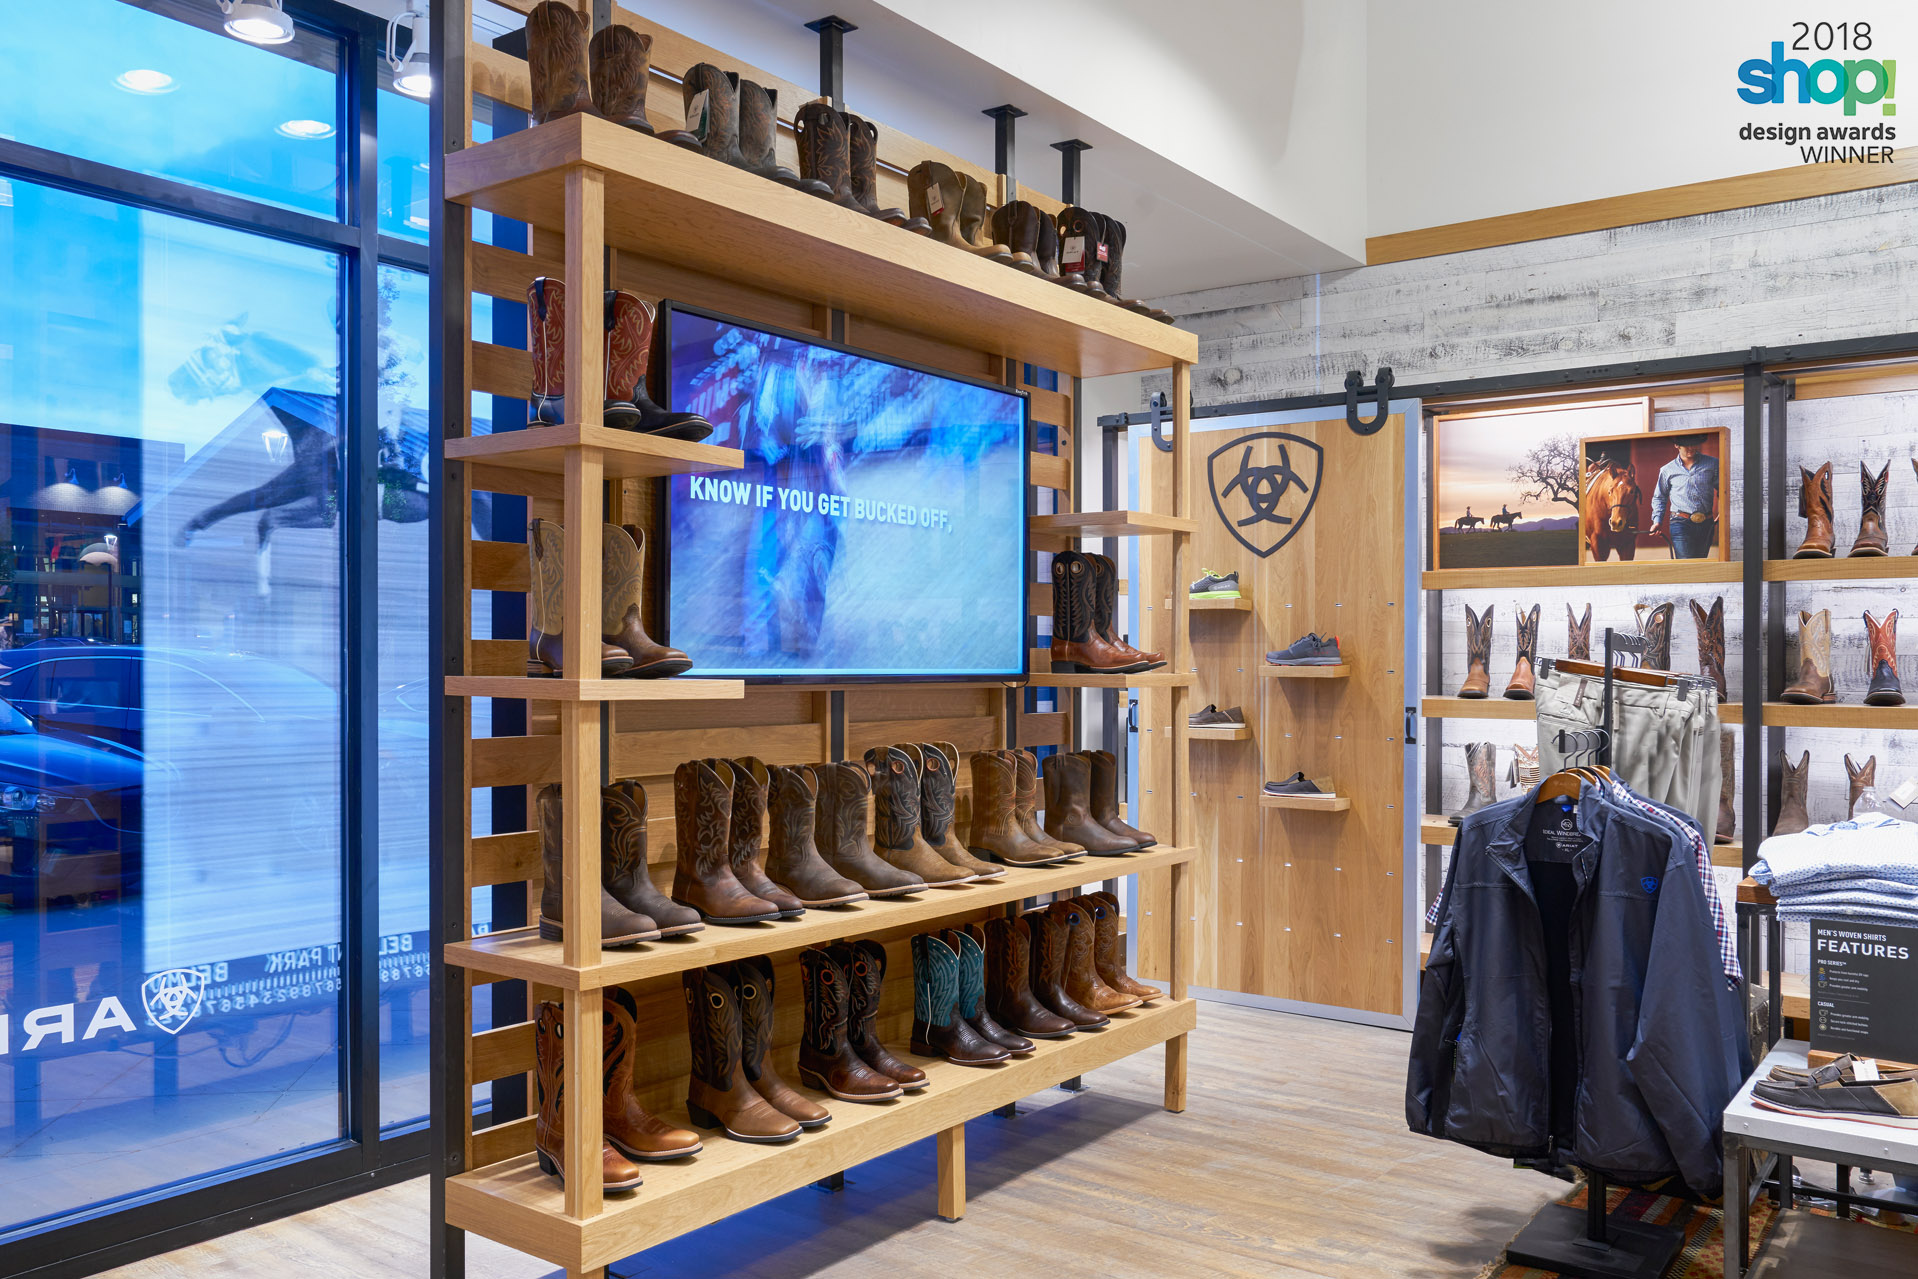 ariat outlet stores